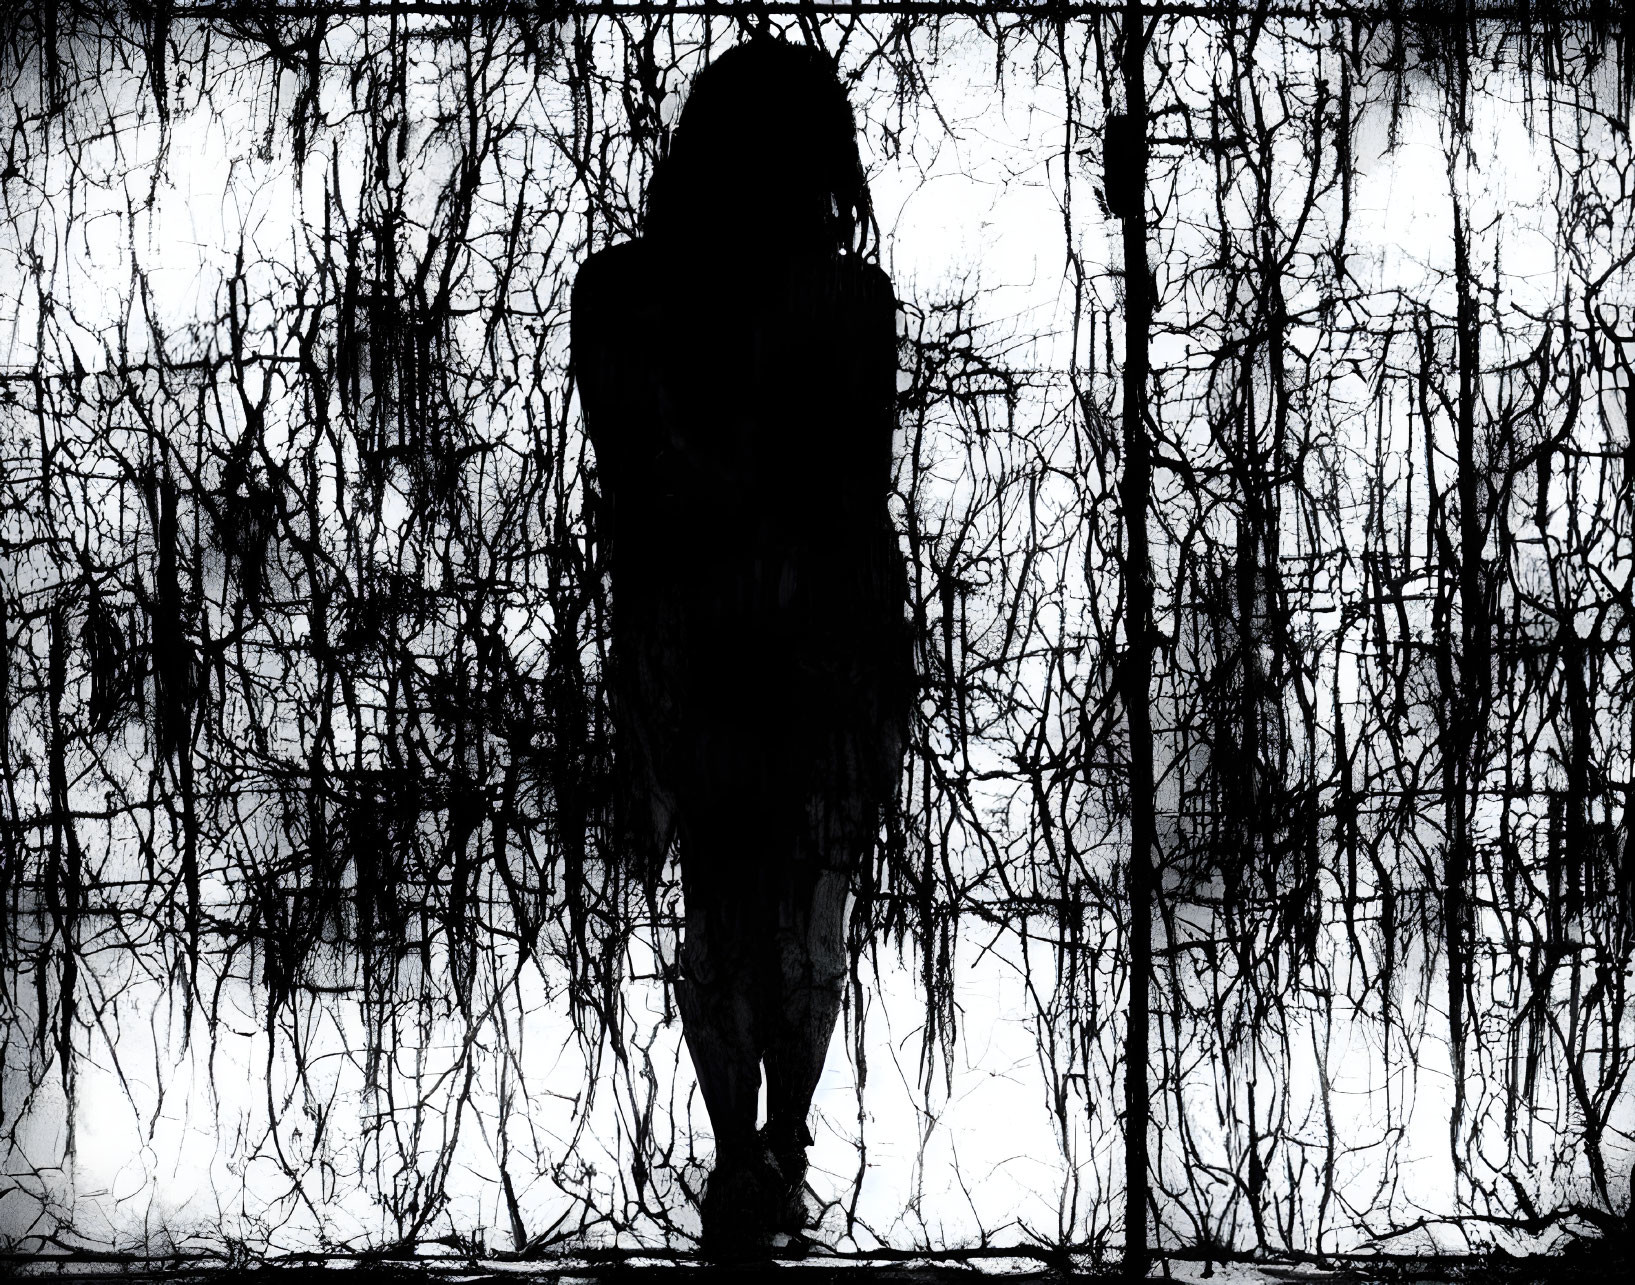 Person's Silhouette Against Textured Tree Root Background